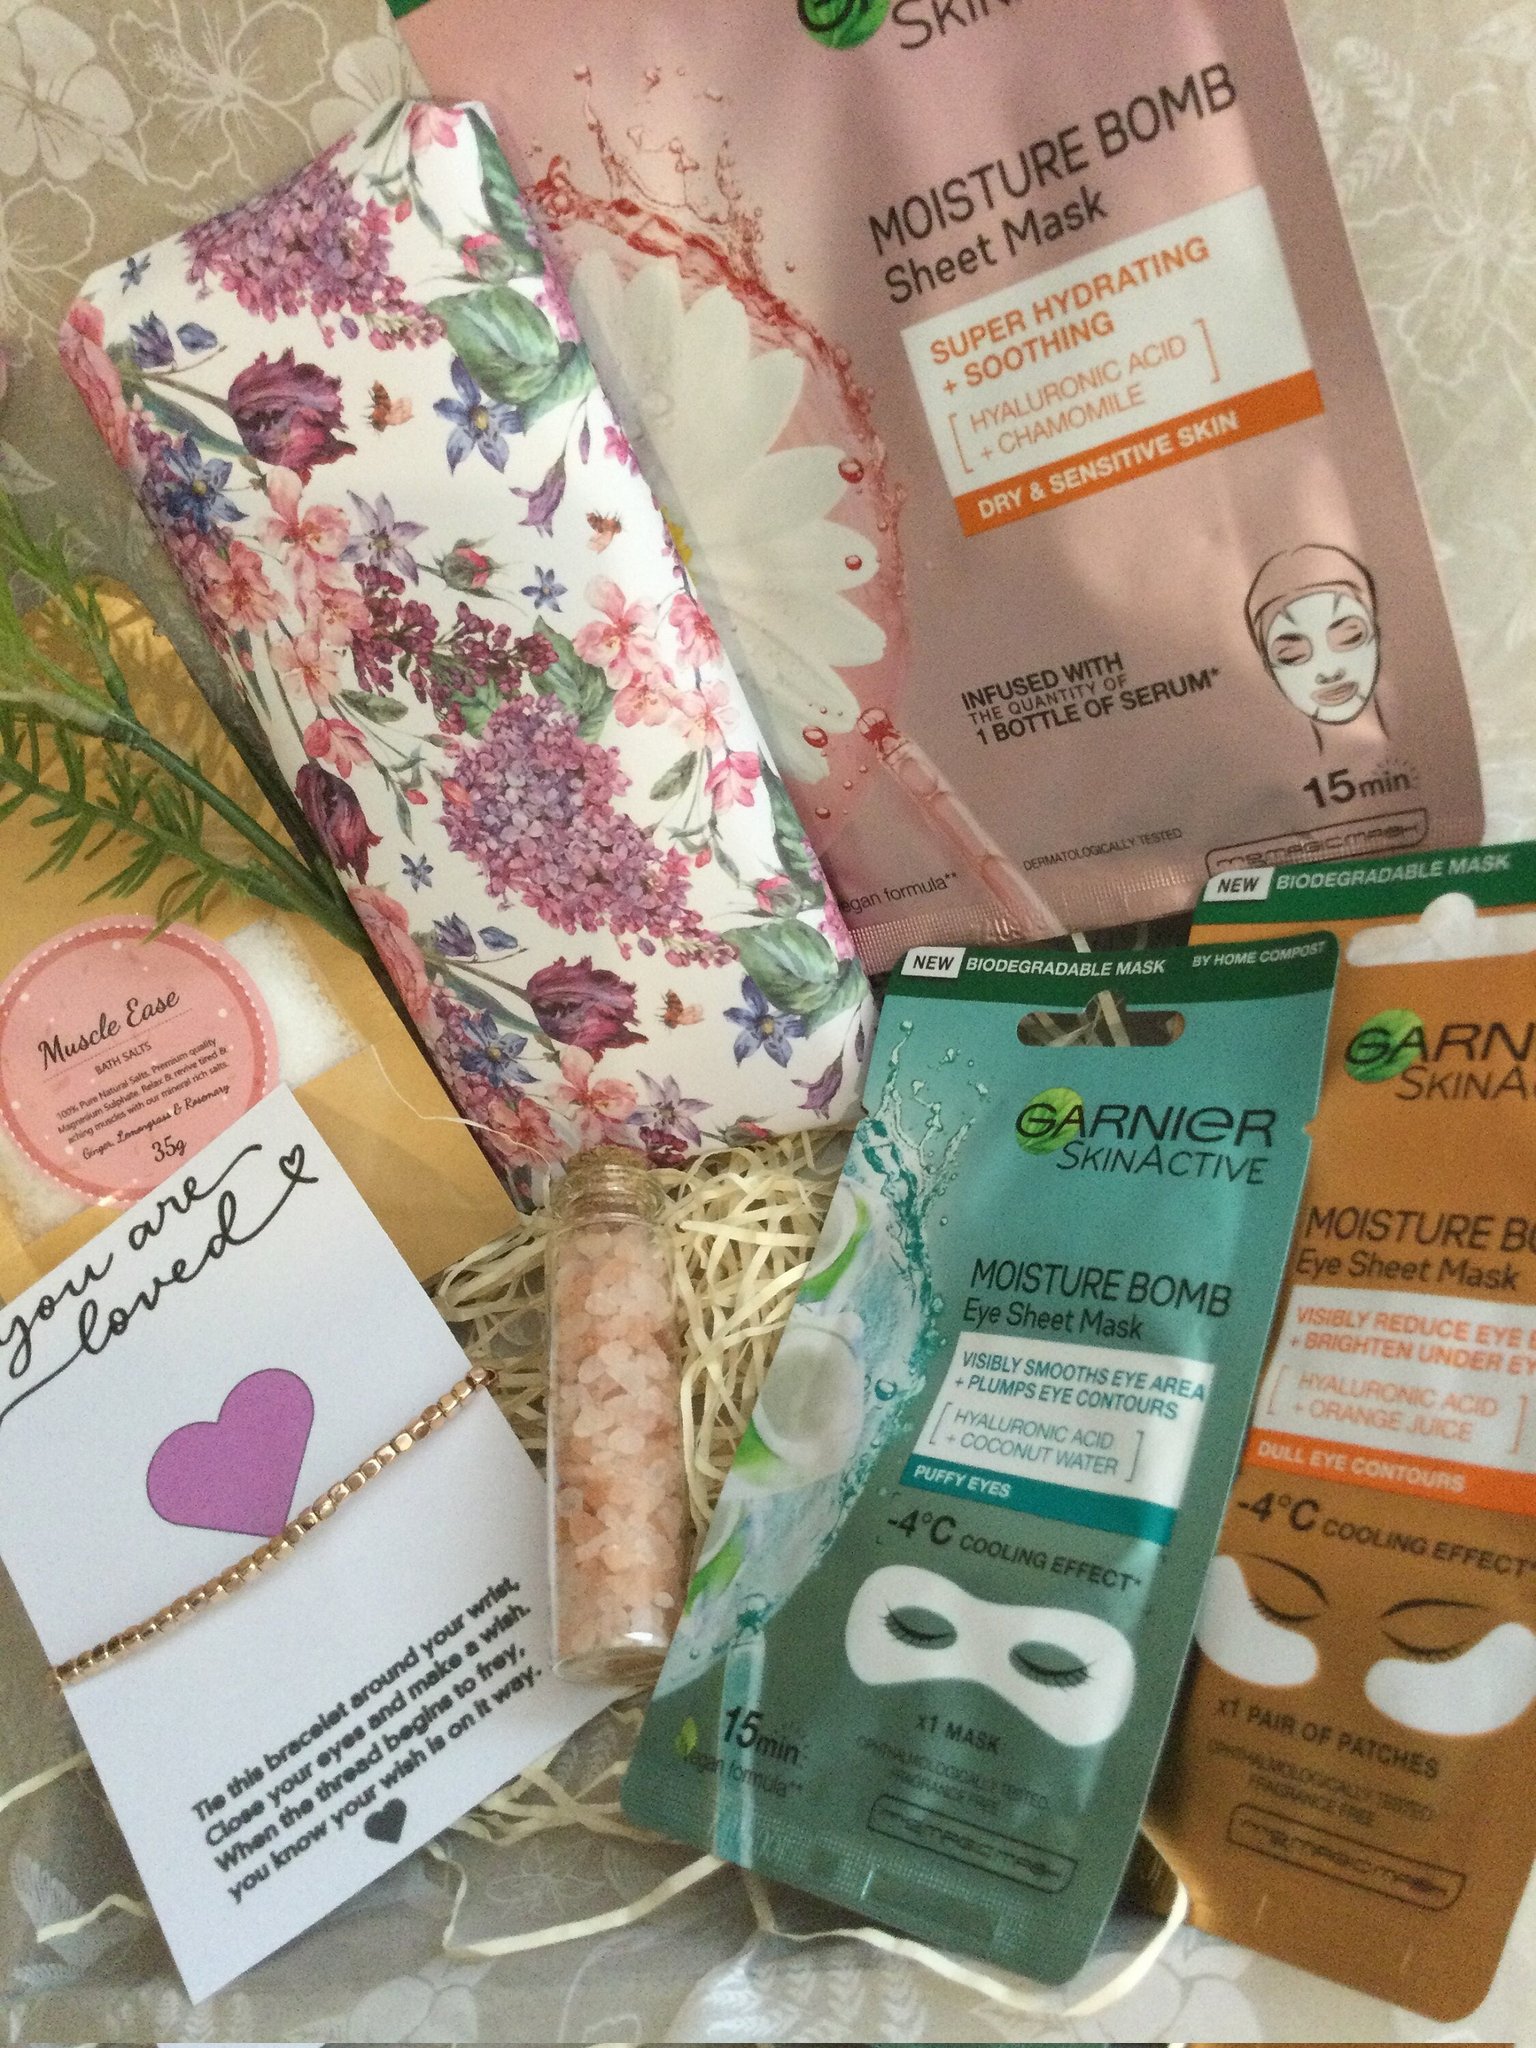 Kimberley Southamm on Twitter: "Excited to the latest to my #etsy shop: Treat pamper giftbox for her/Birthday gift/letter box/self care/bride box/spa treat #treatgiftbox https://t.co/1WVb7TTYDt https://t.co/S8RB15iyew" / Twitter